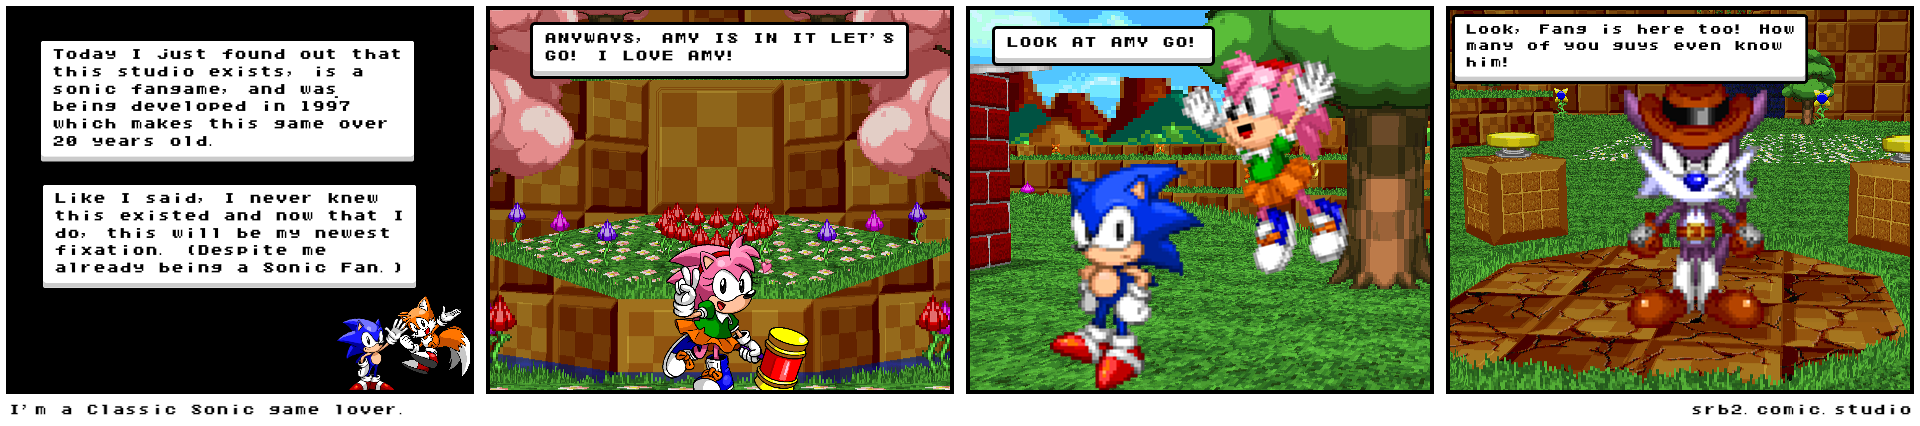 I'm a Classic Sonic game lover.